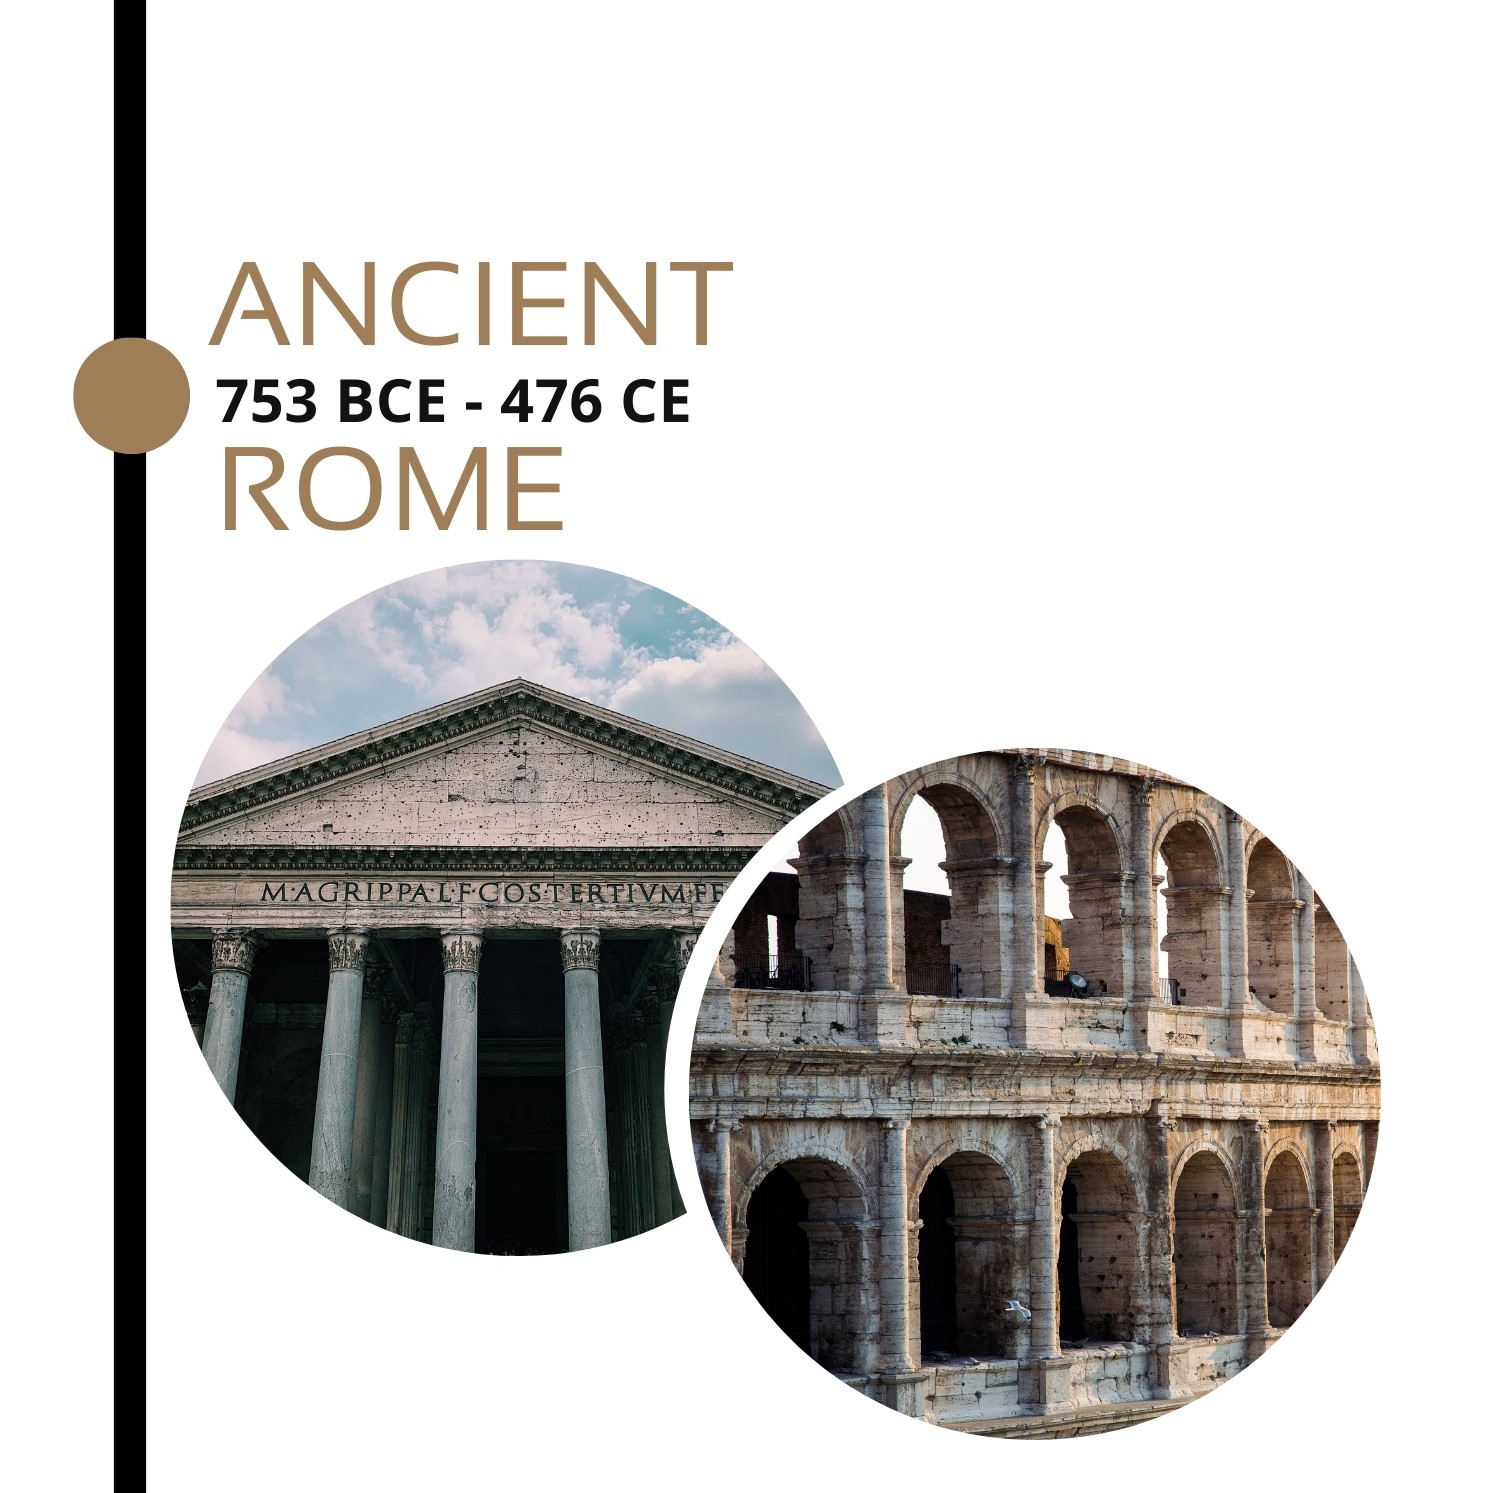 History of Stone_Ancient Rome